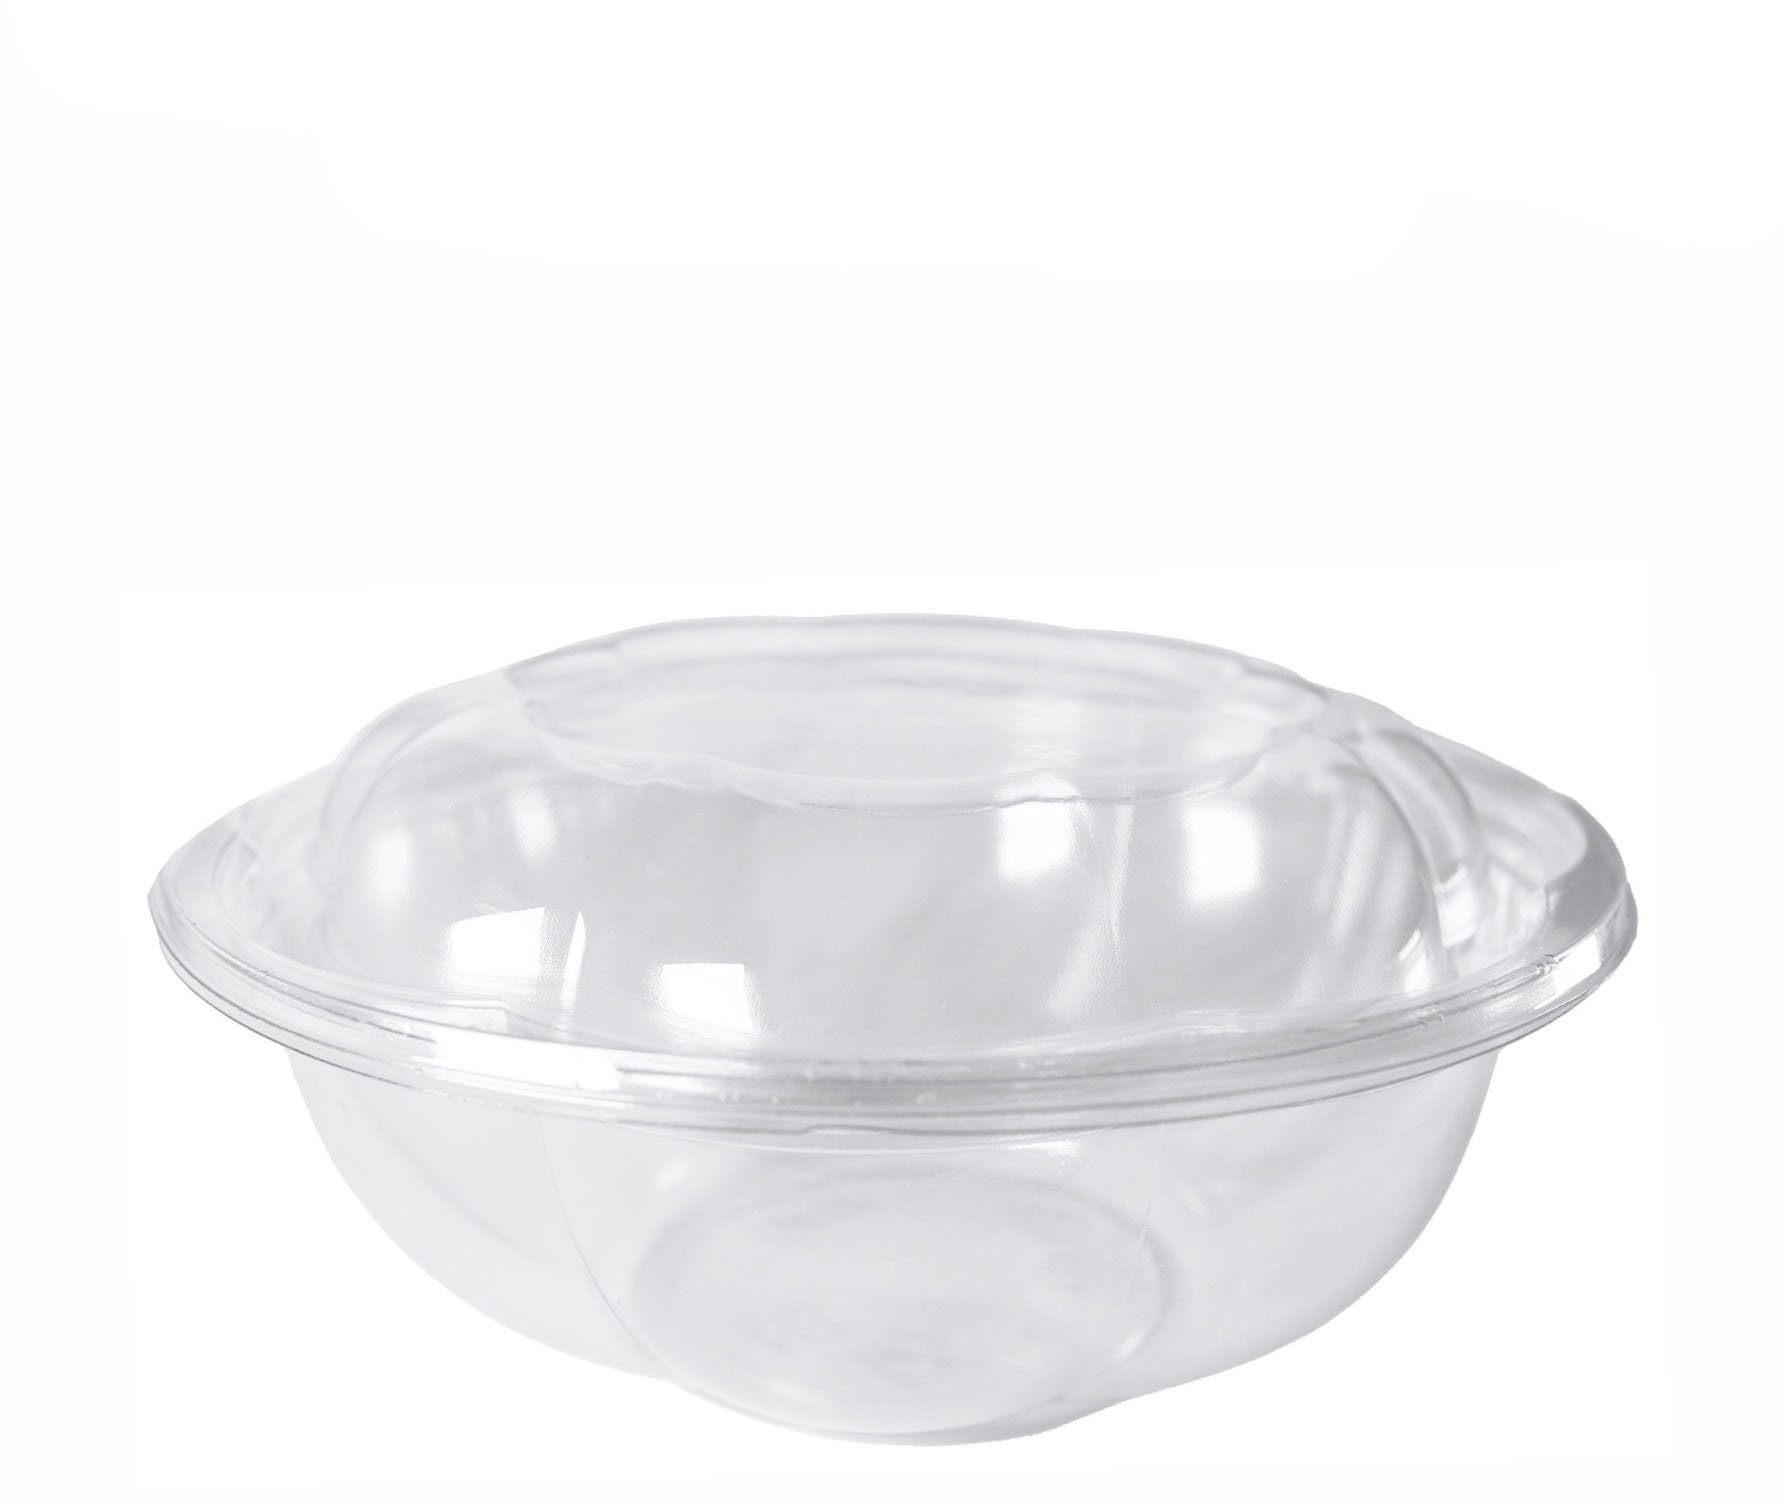 EcoQuality 24oz Disposable Bowls with Clear Lids - Rectangular